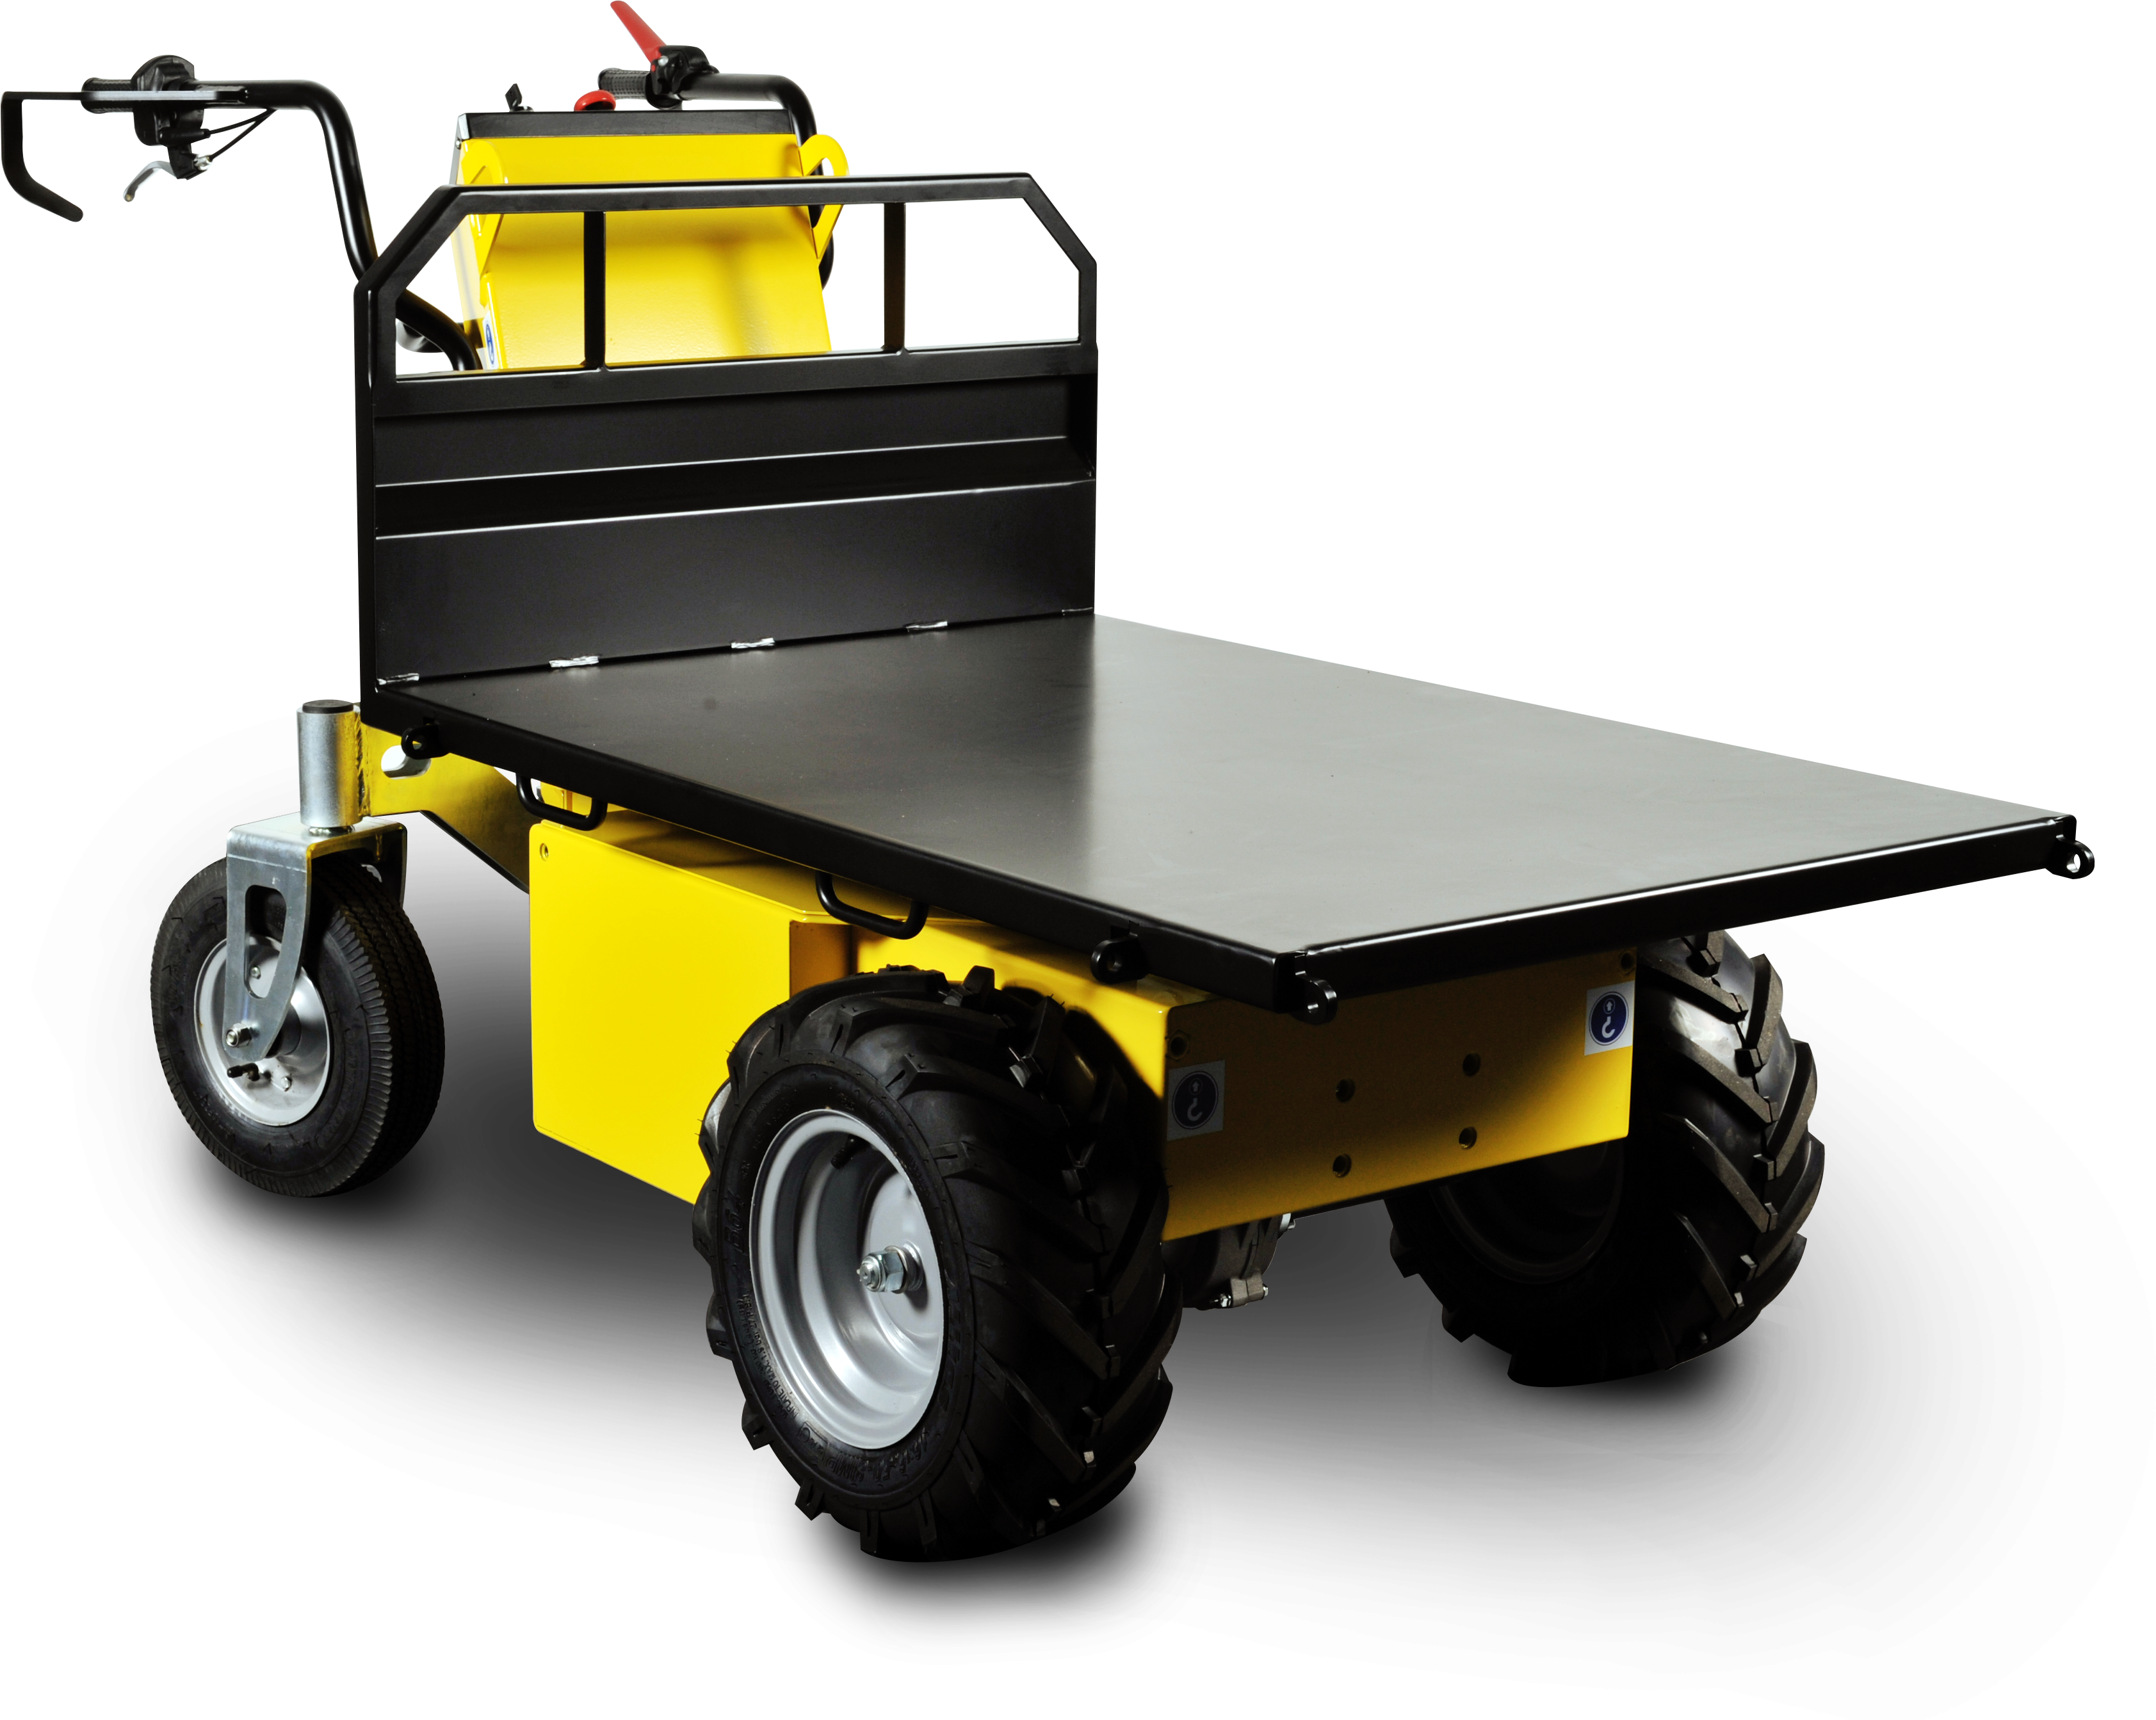 Buy Electric Dumper - Flatbed in Electric Dumpers from Alitrak available at Astrolift NZ